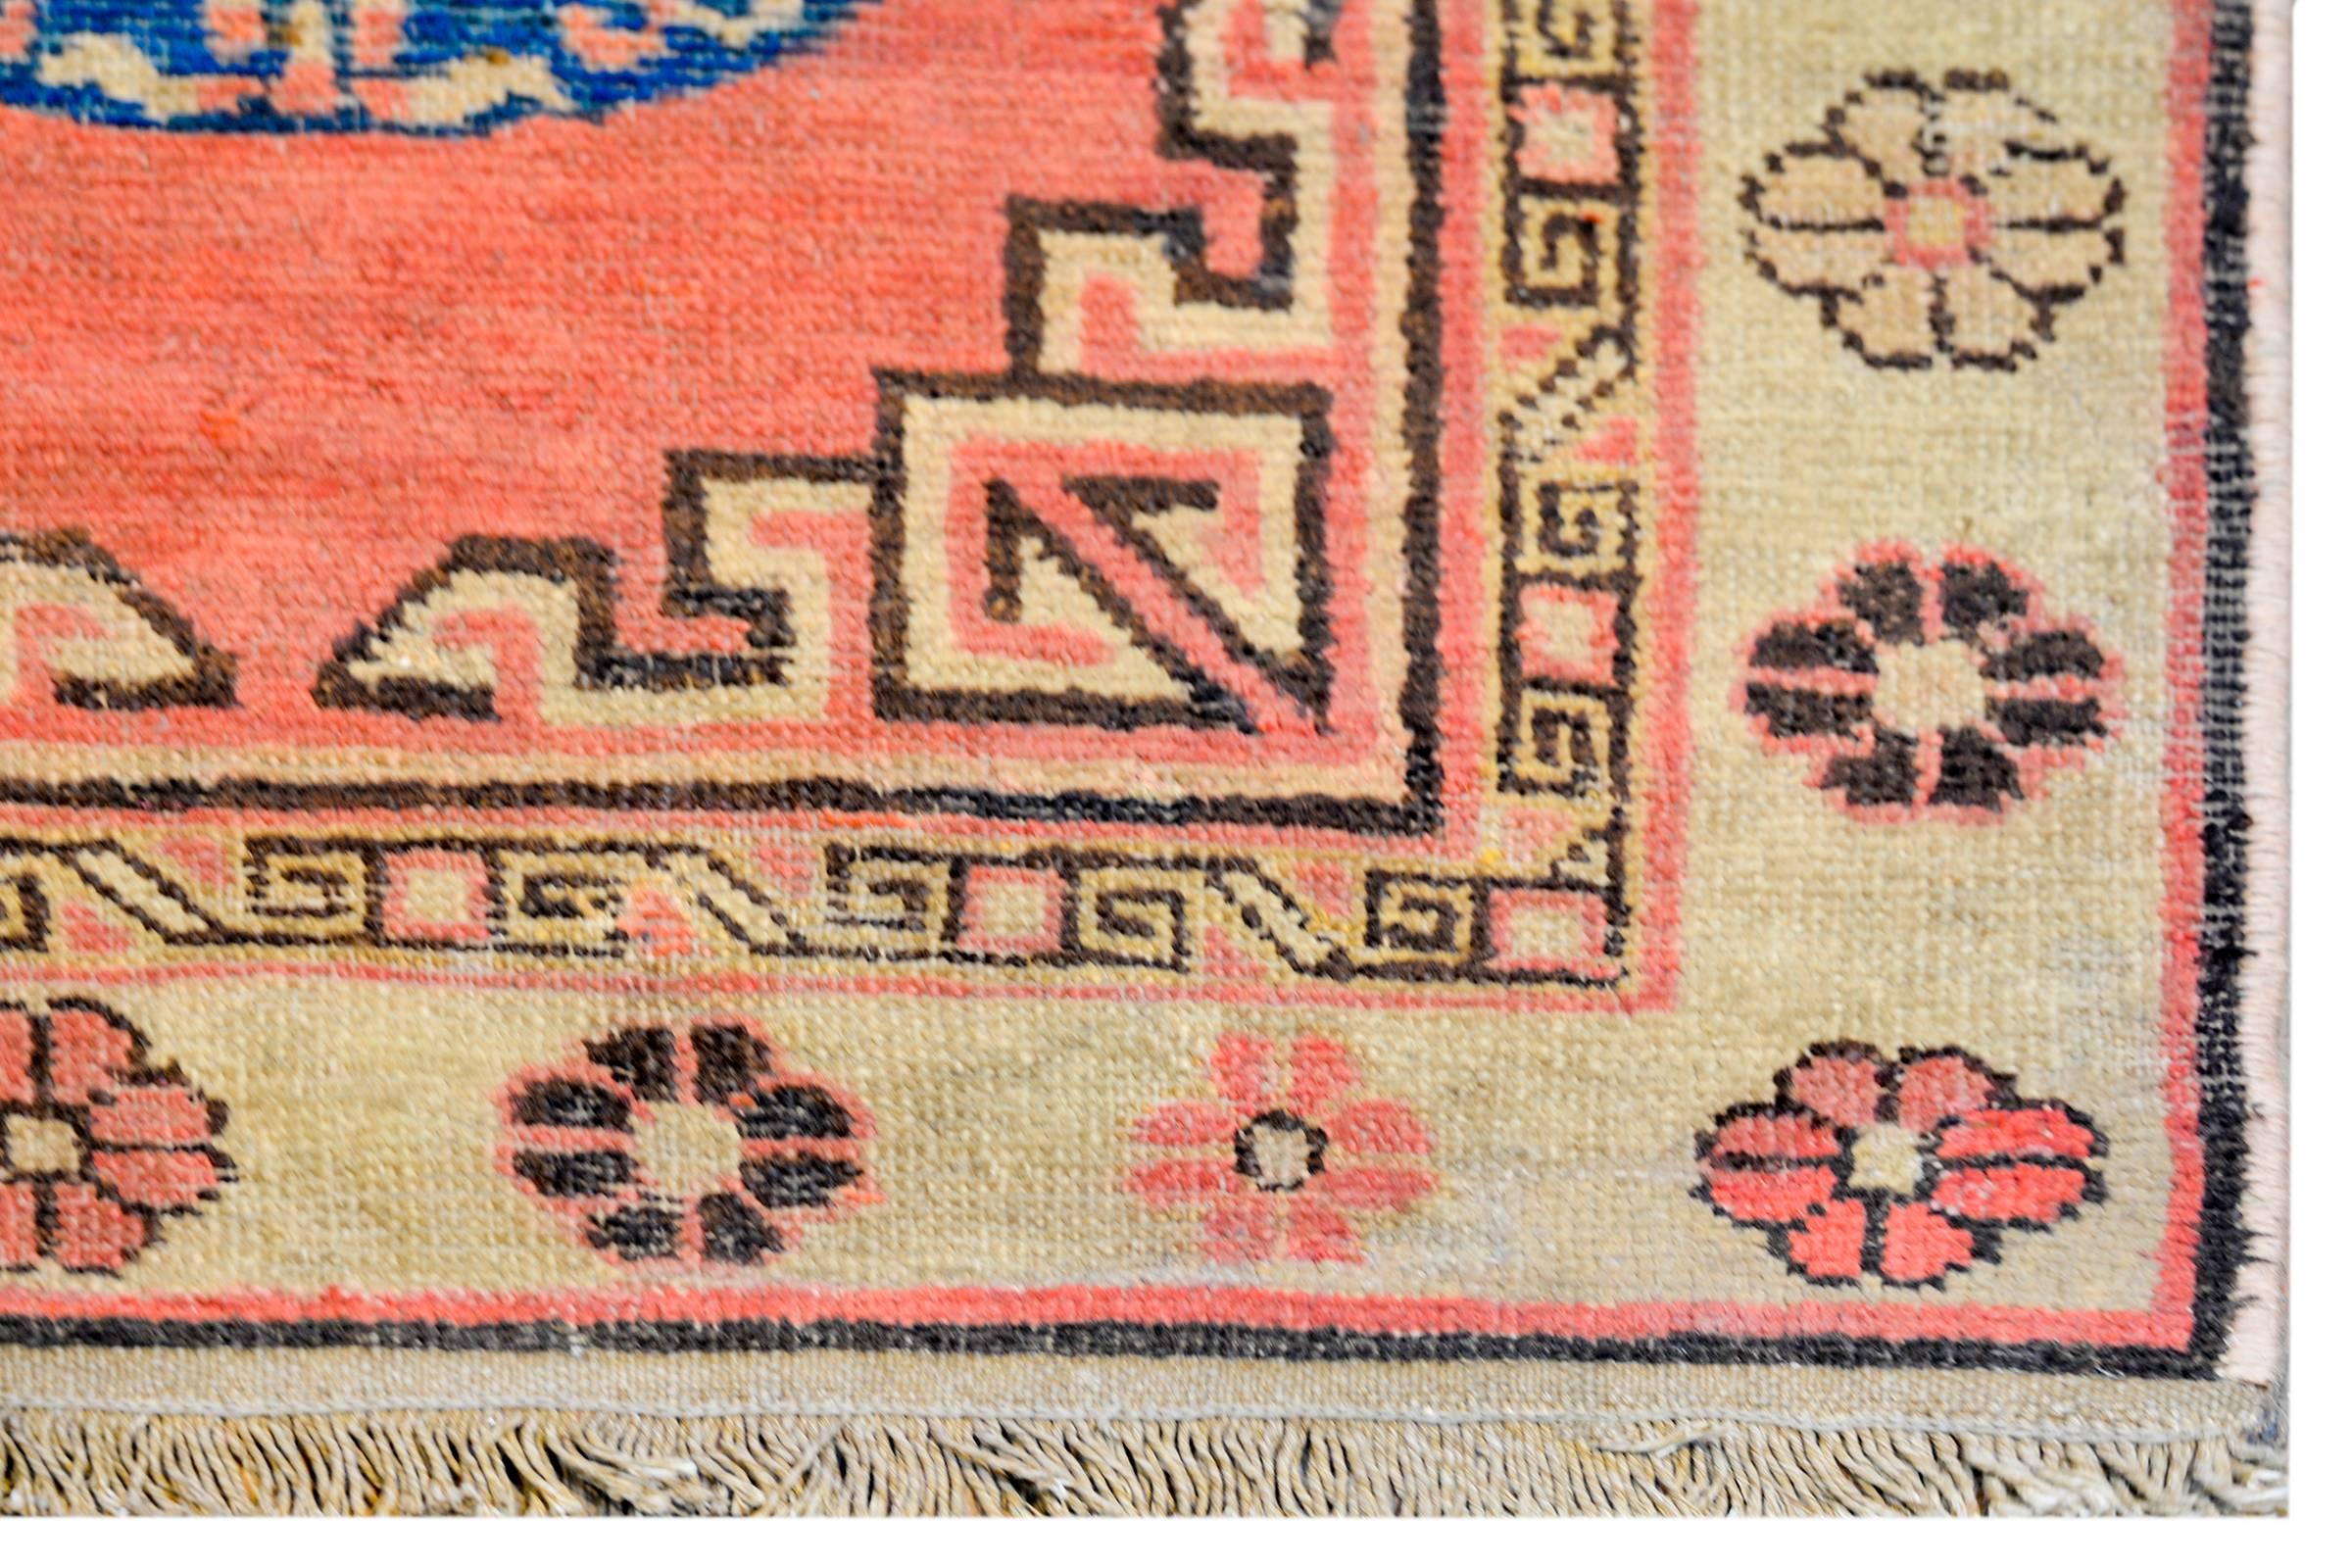 A beautiful early 20th century Central Asian Khotan rug with a three large round medallions amidst a field of swirling clouds, on a coral colored background. The border is composed of two patterned stripes. The inner stripe is a geometric pattern